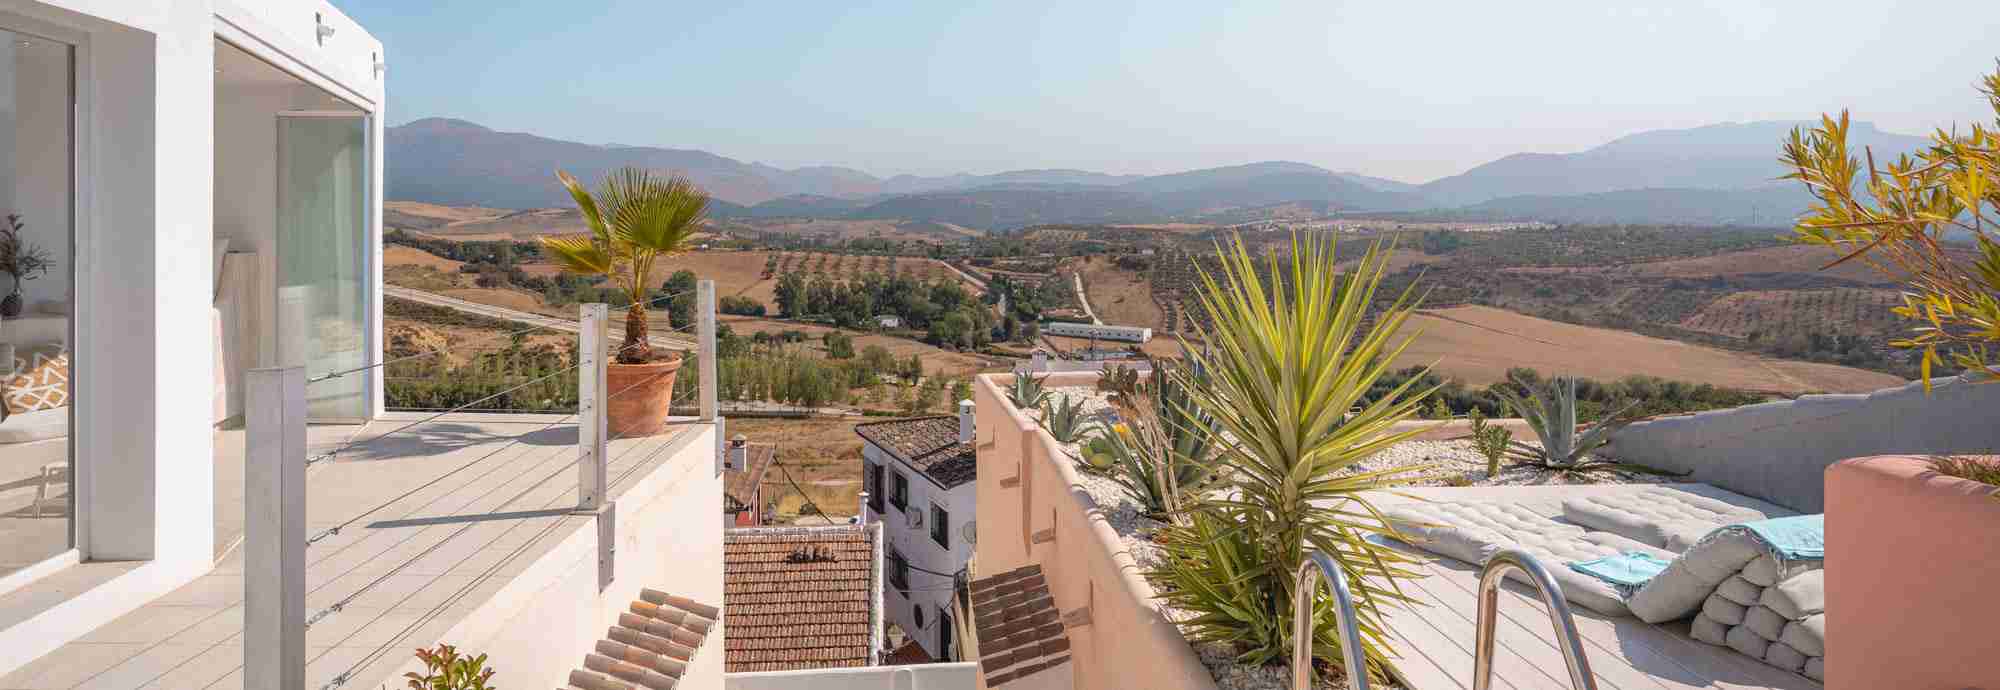 Quality townhouse with 2 pools walking distance from historical Ronda town